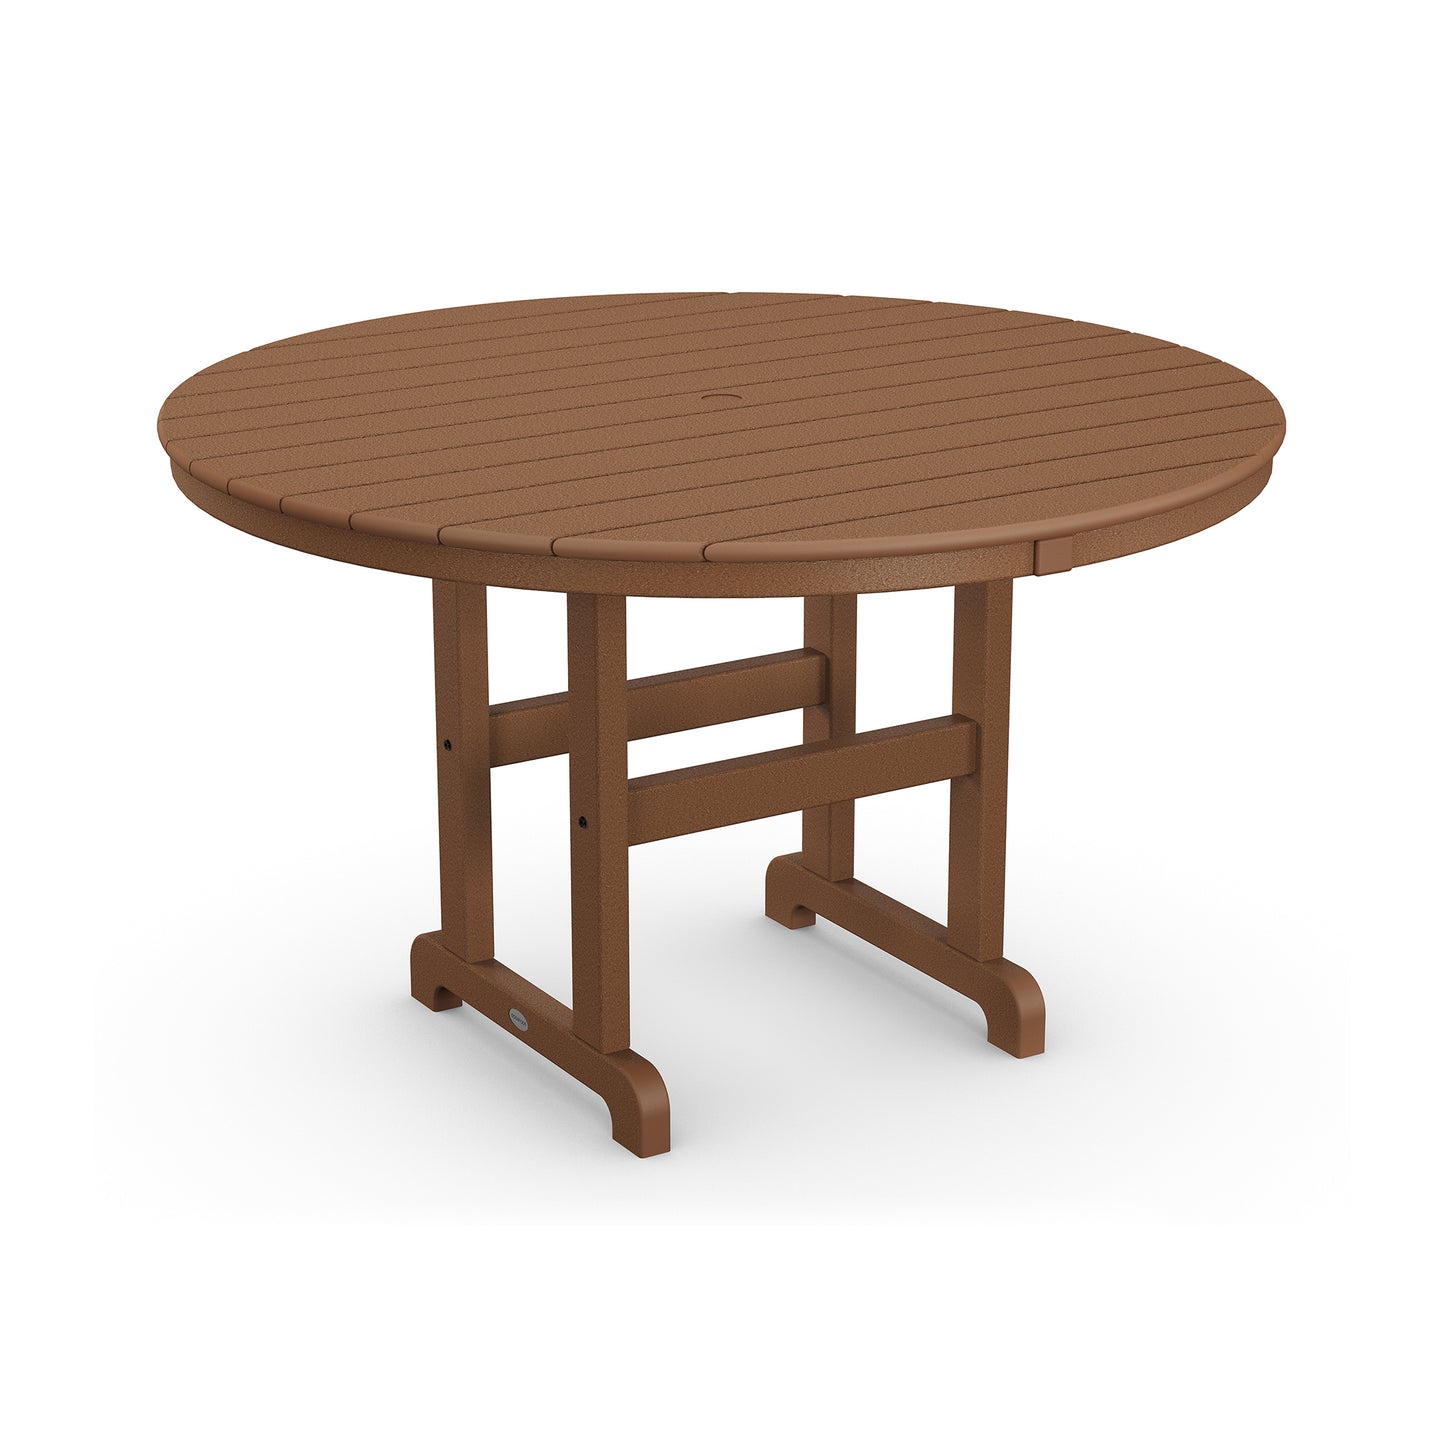 A 3D rendering of a round, brown POLYWOOD® outdoor dining table with slatted top and sturdy legs, isolated on a white background.